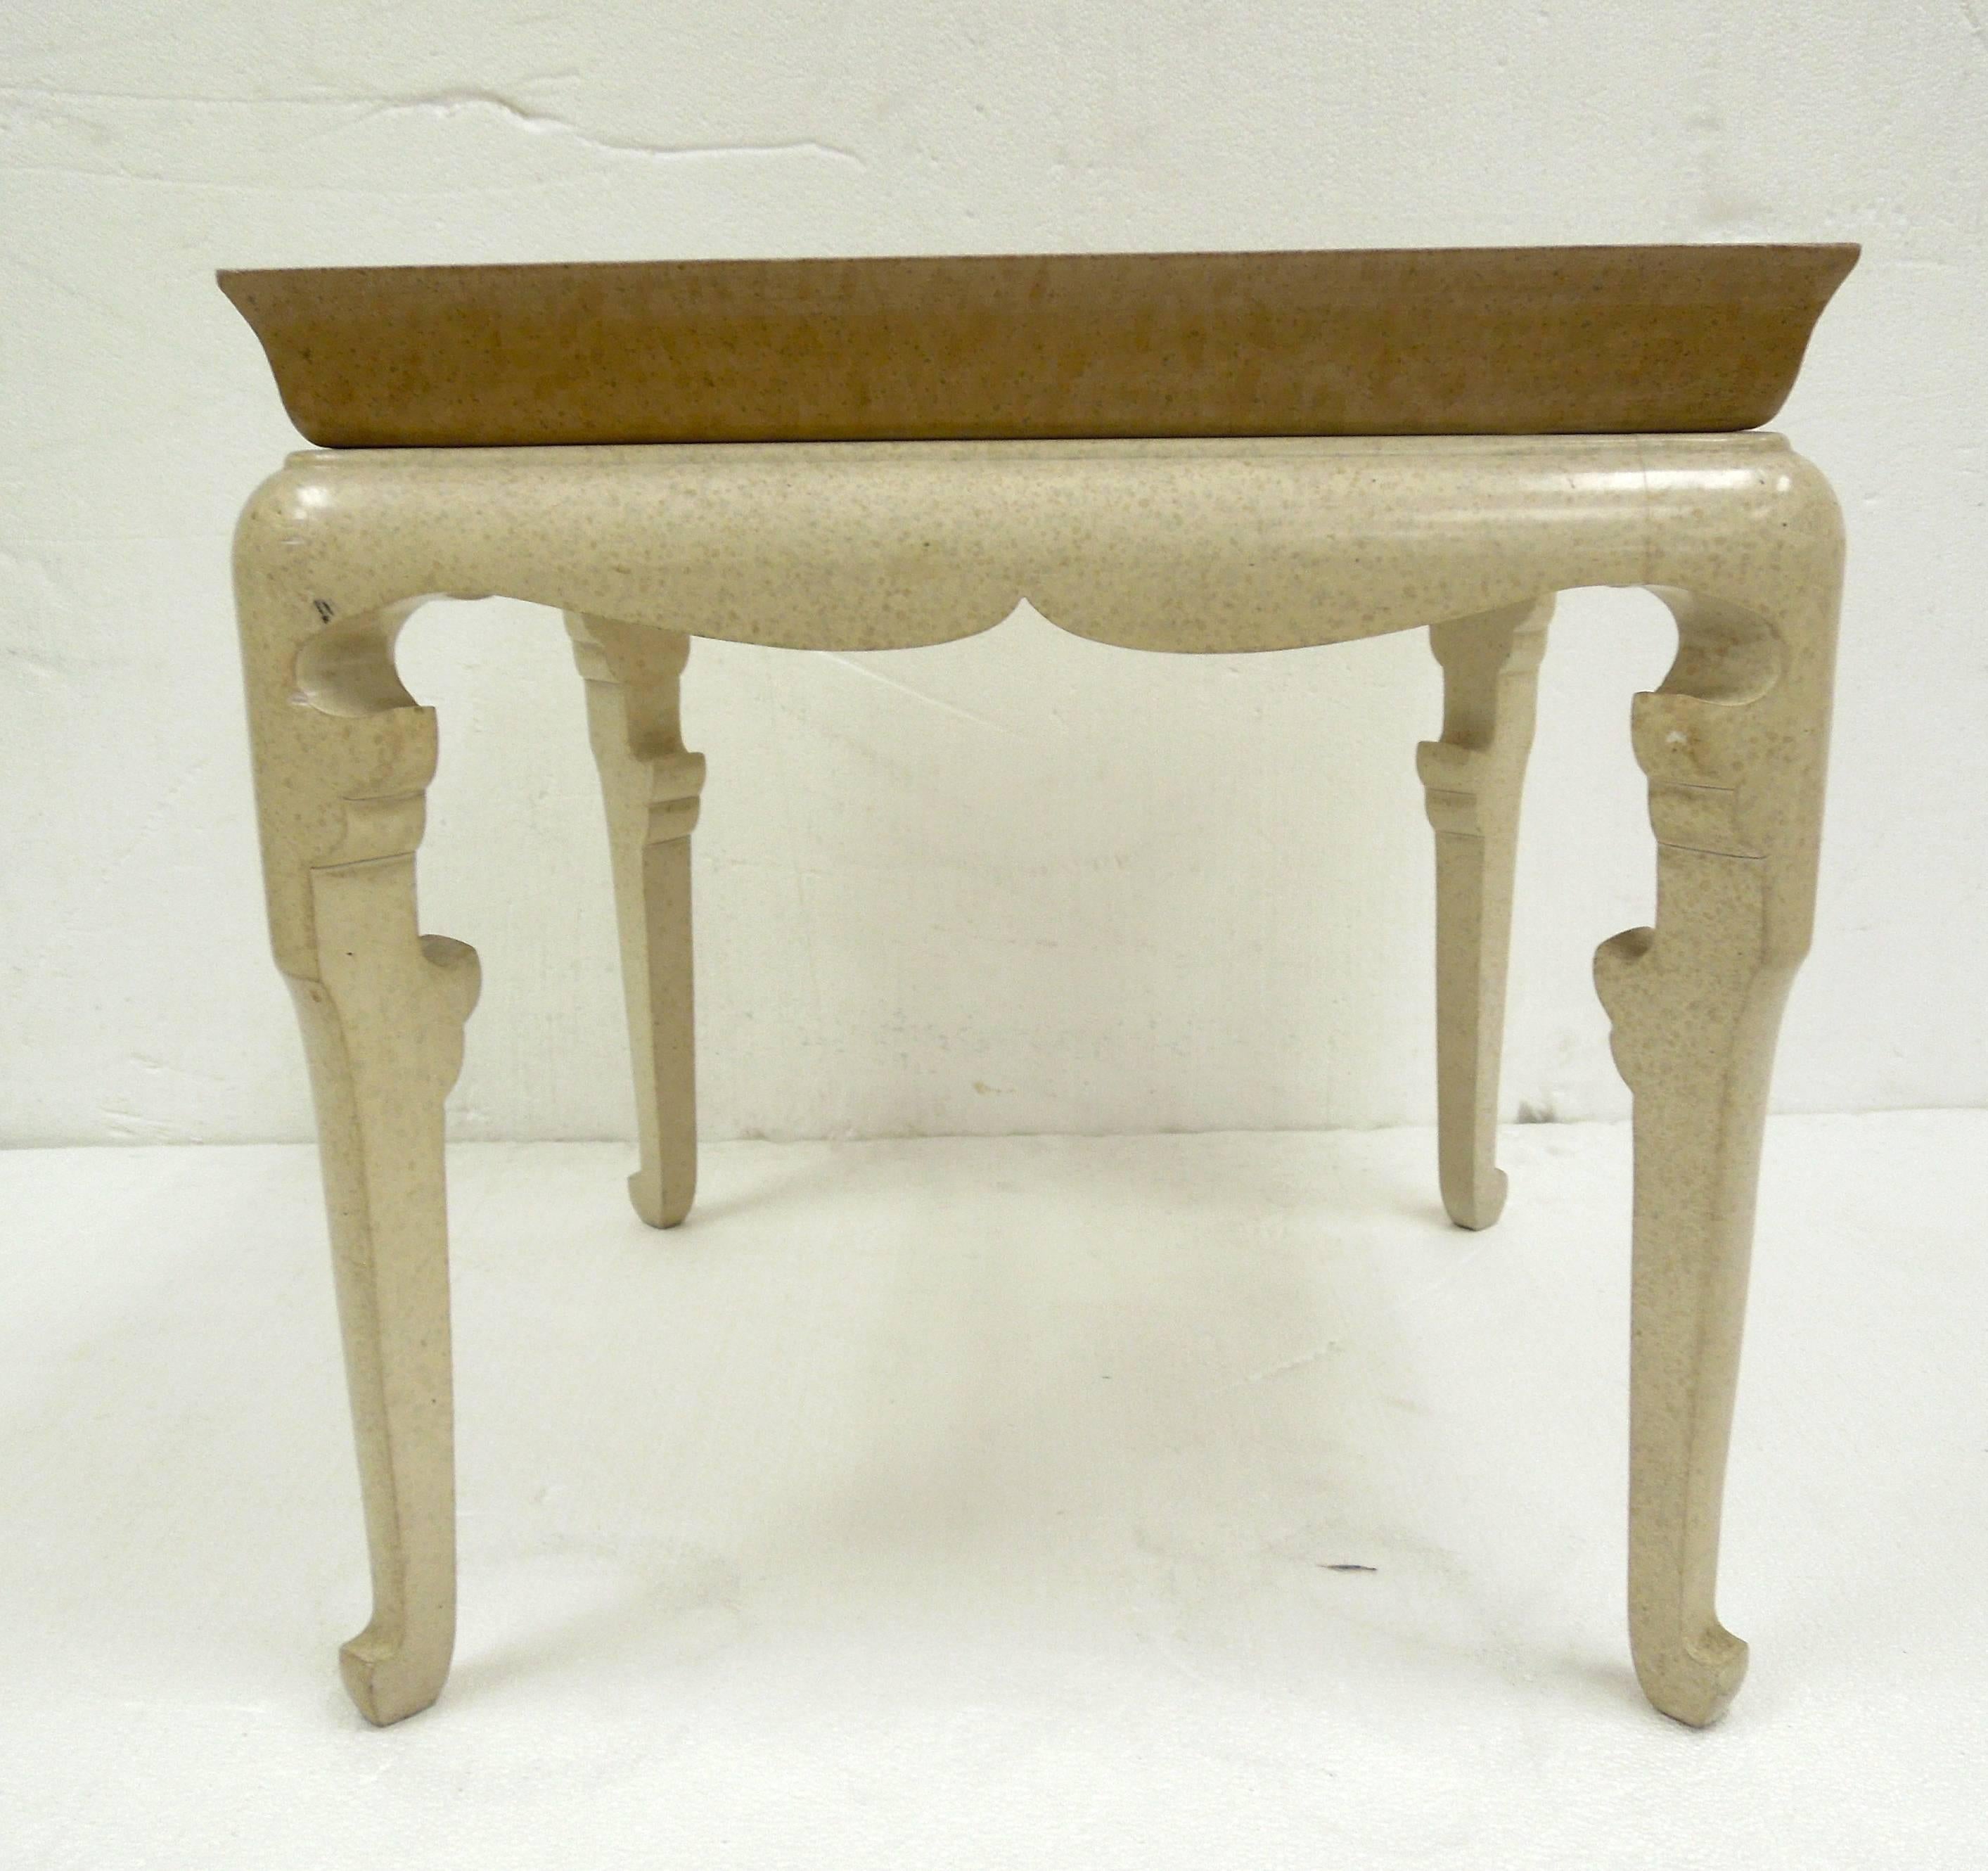 Handmade in the USA Factory of Marge Carson in the 1980s, is this beautiful two-tone faux finish side table. Looks like a tray top (not removable) Beautiful taupe and crème hand done faux finish. Signed. Sculptural, Jean Michele Frank style legs.